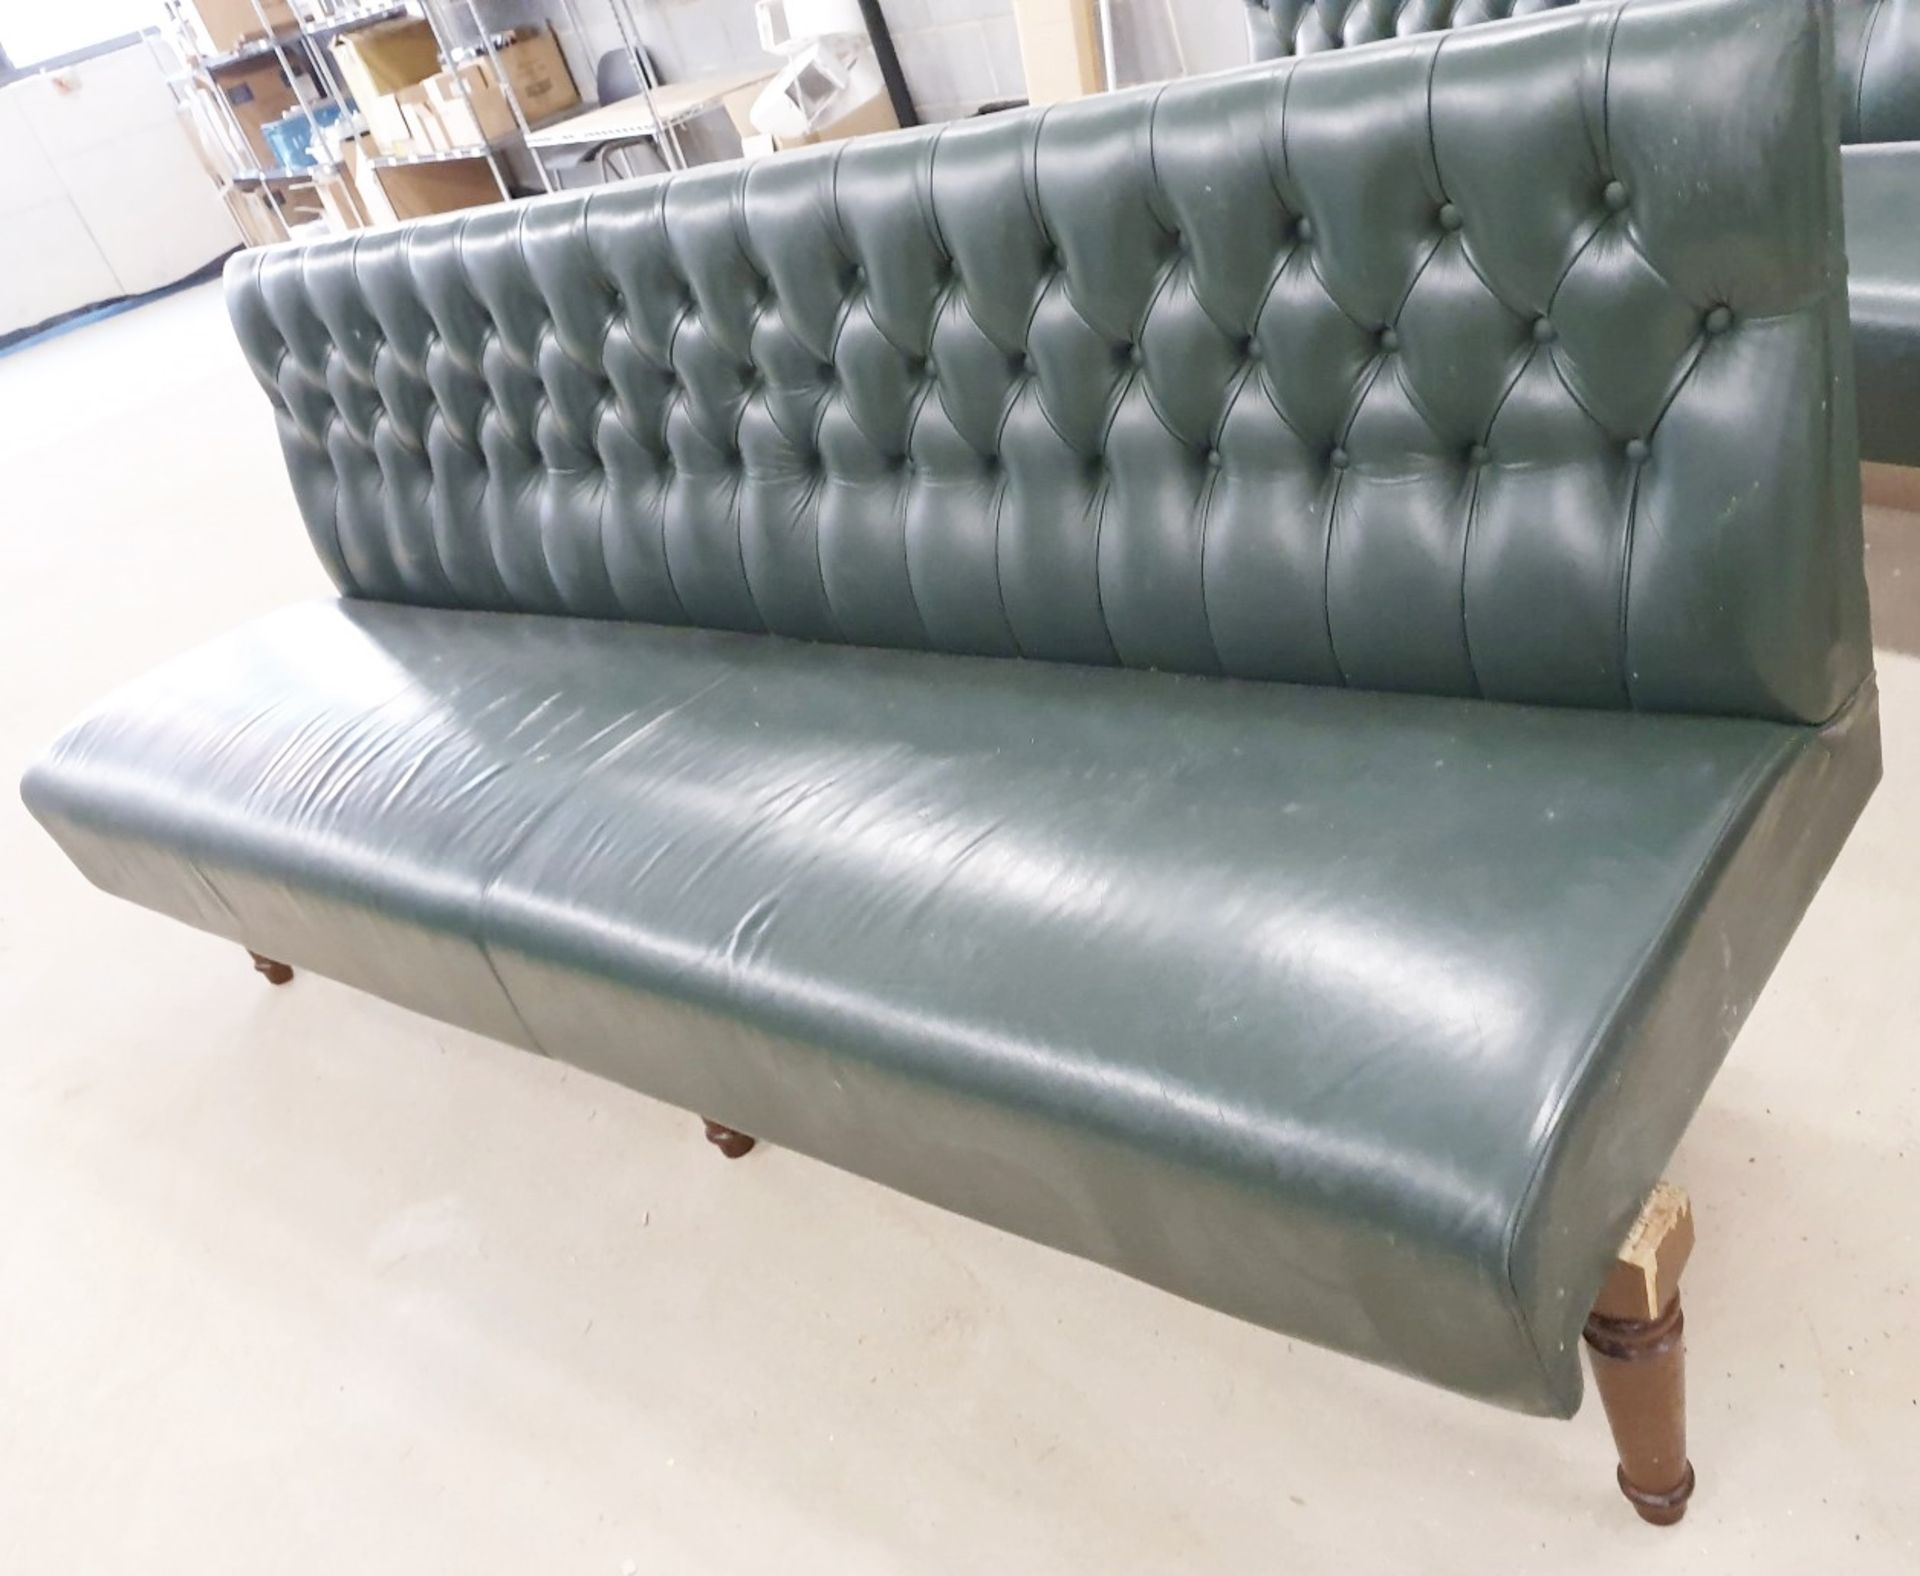 1 x Restaurant Seating Bench Upholstery in Green With Studded Back and Oak Turned Legs - H91 - Image 3 of 10